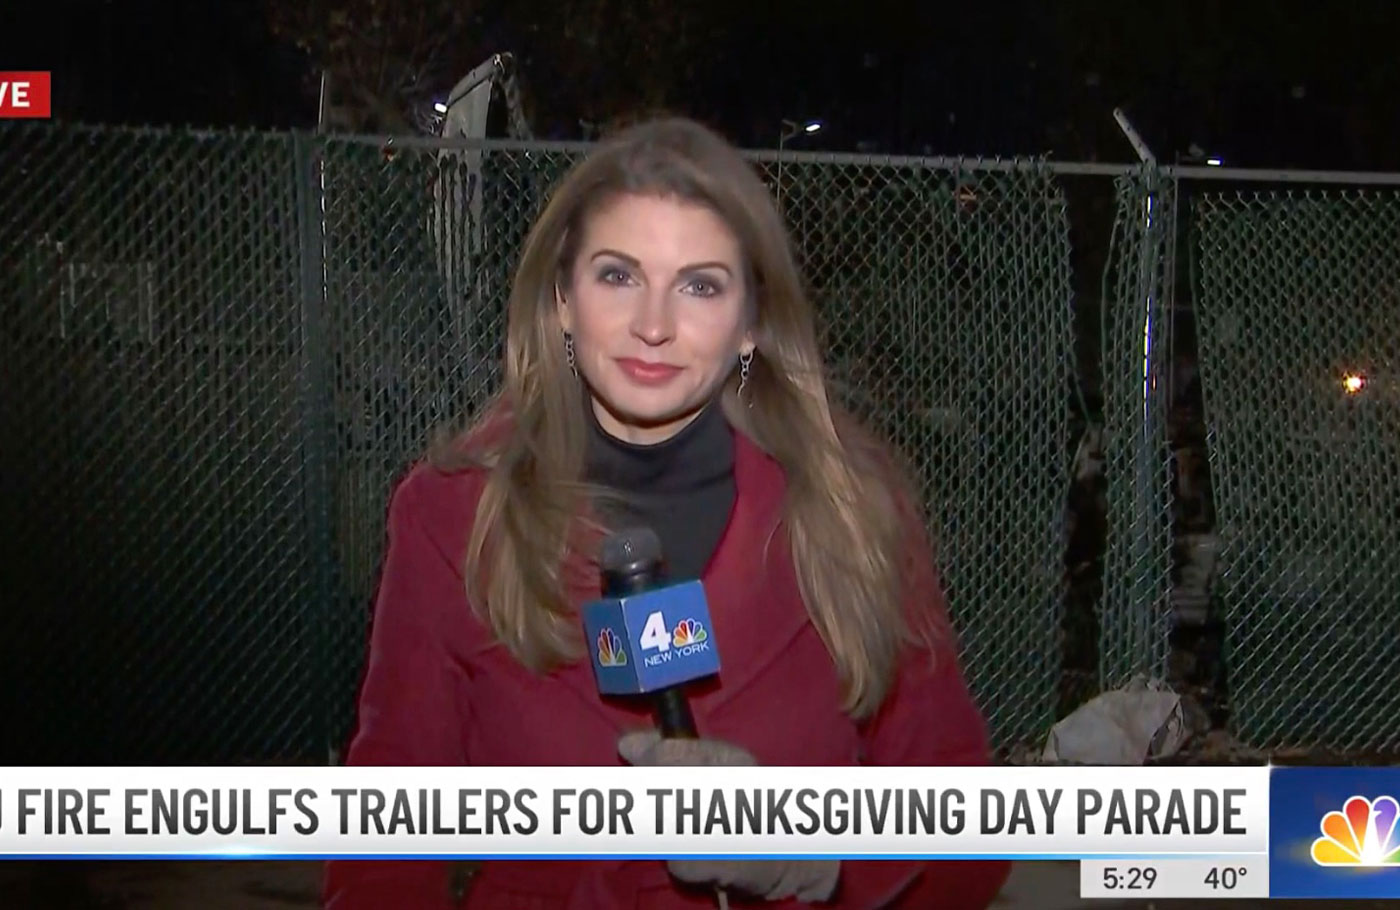 NJ Fire Engulfs Trailers for Thanksgiving Day Parade